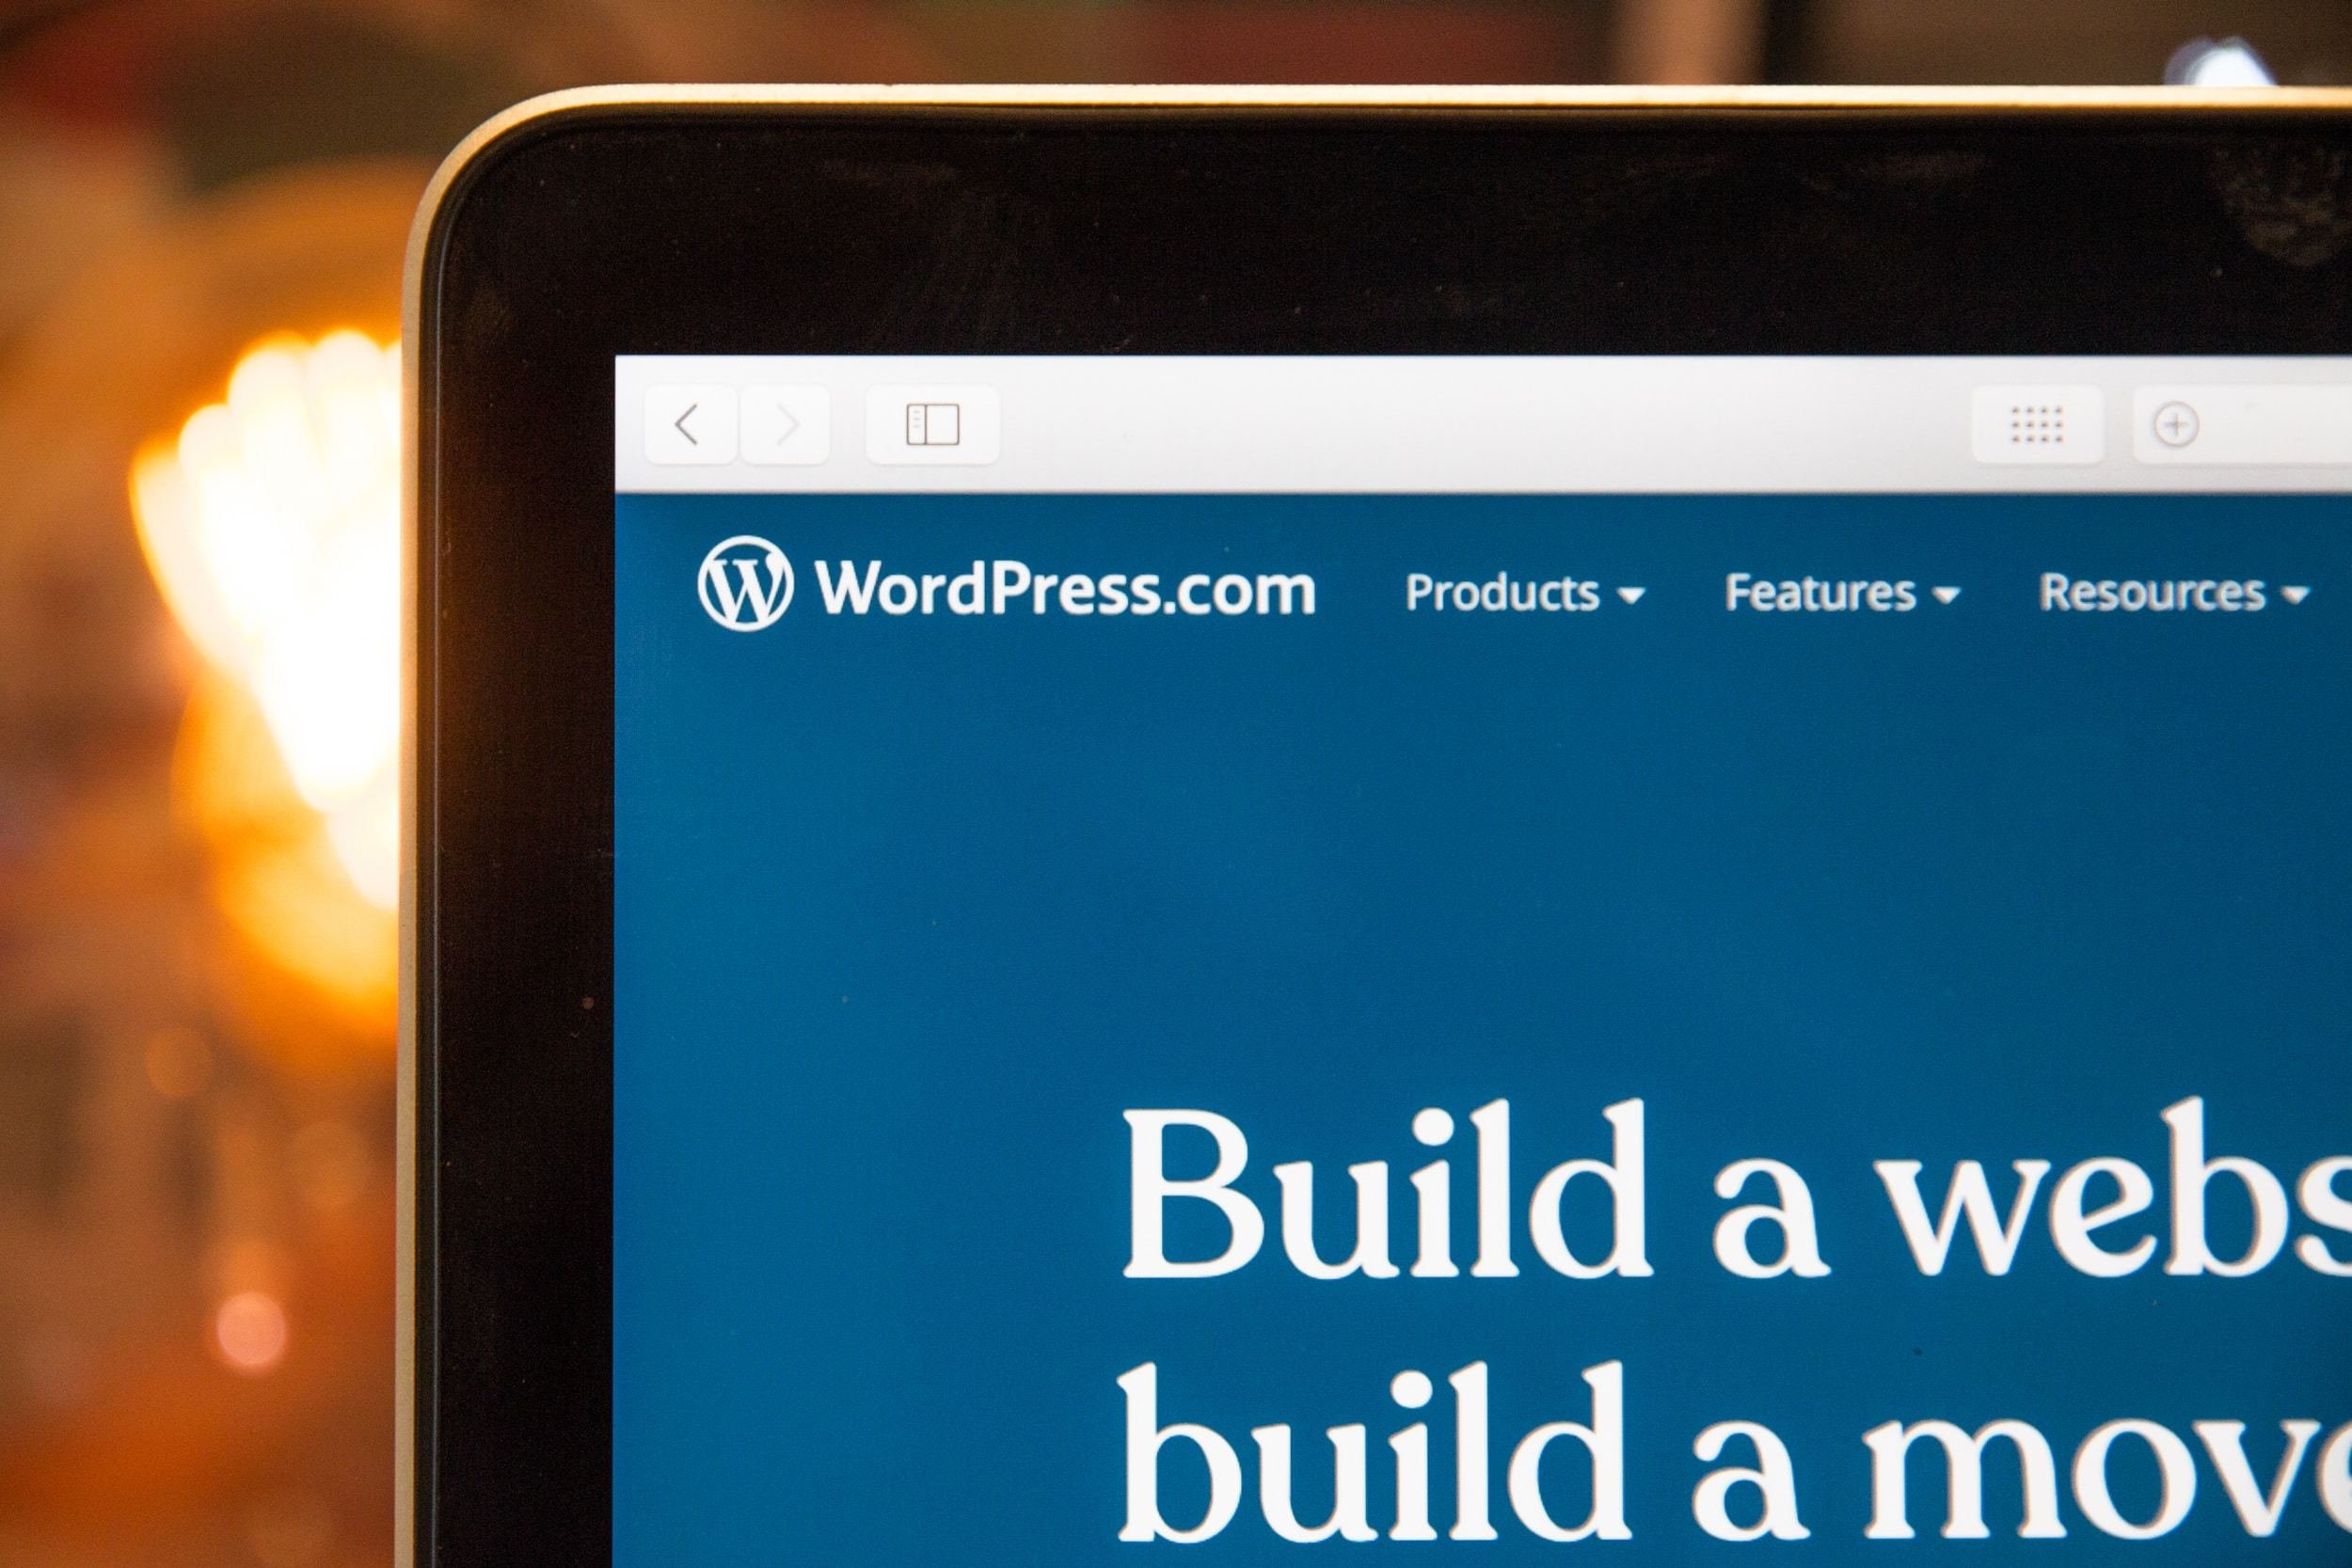  Take Your Business Online With The Website Builder: A Simple (But Complete) Guide